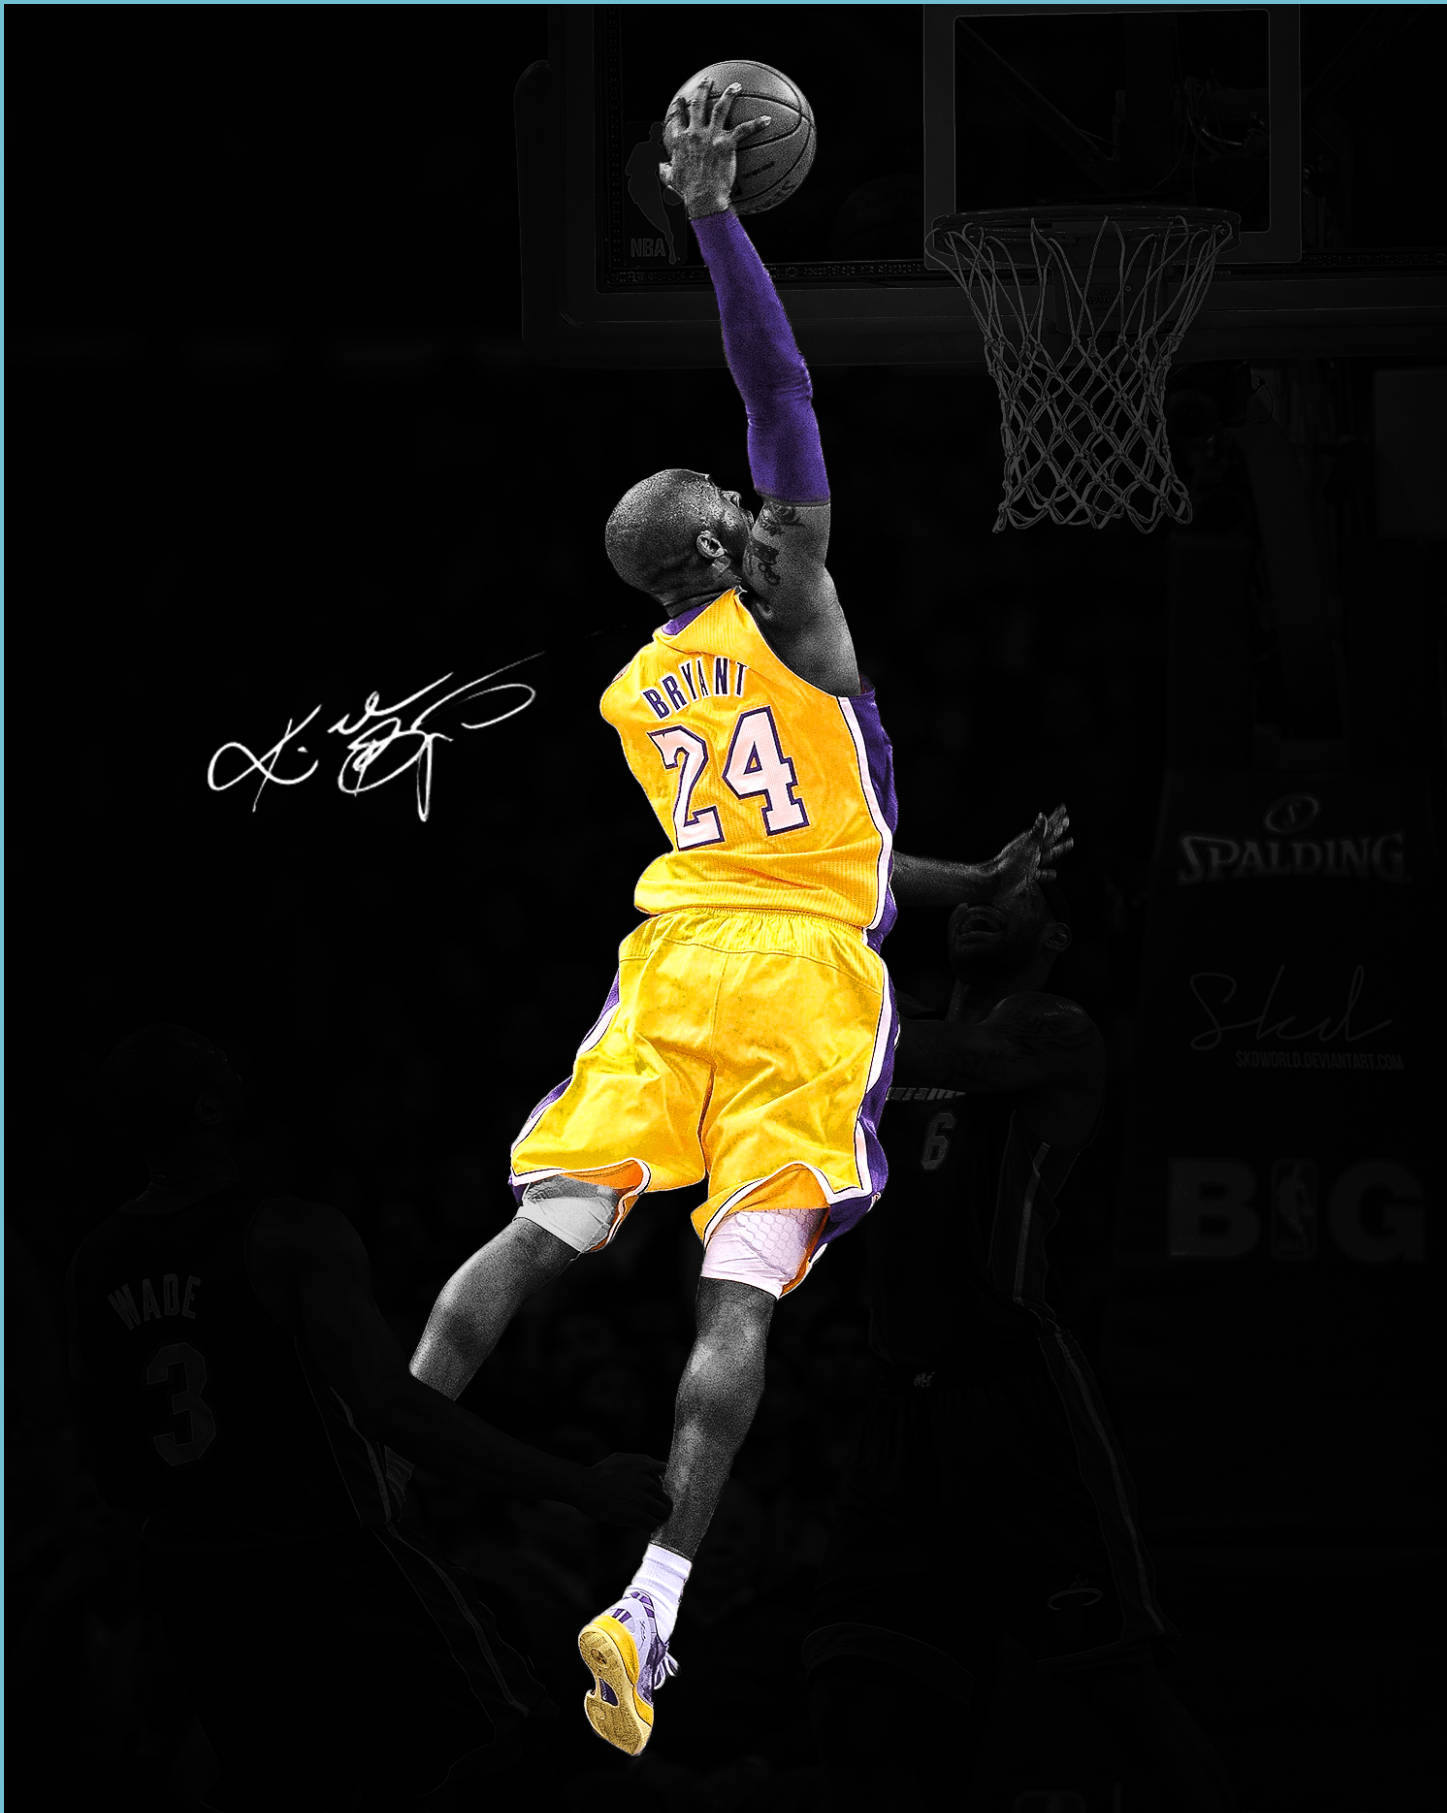 Download Aesthetic Kobe Bryant With Trophy Wallpaper